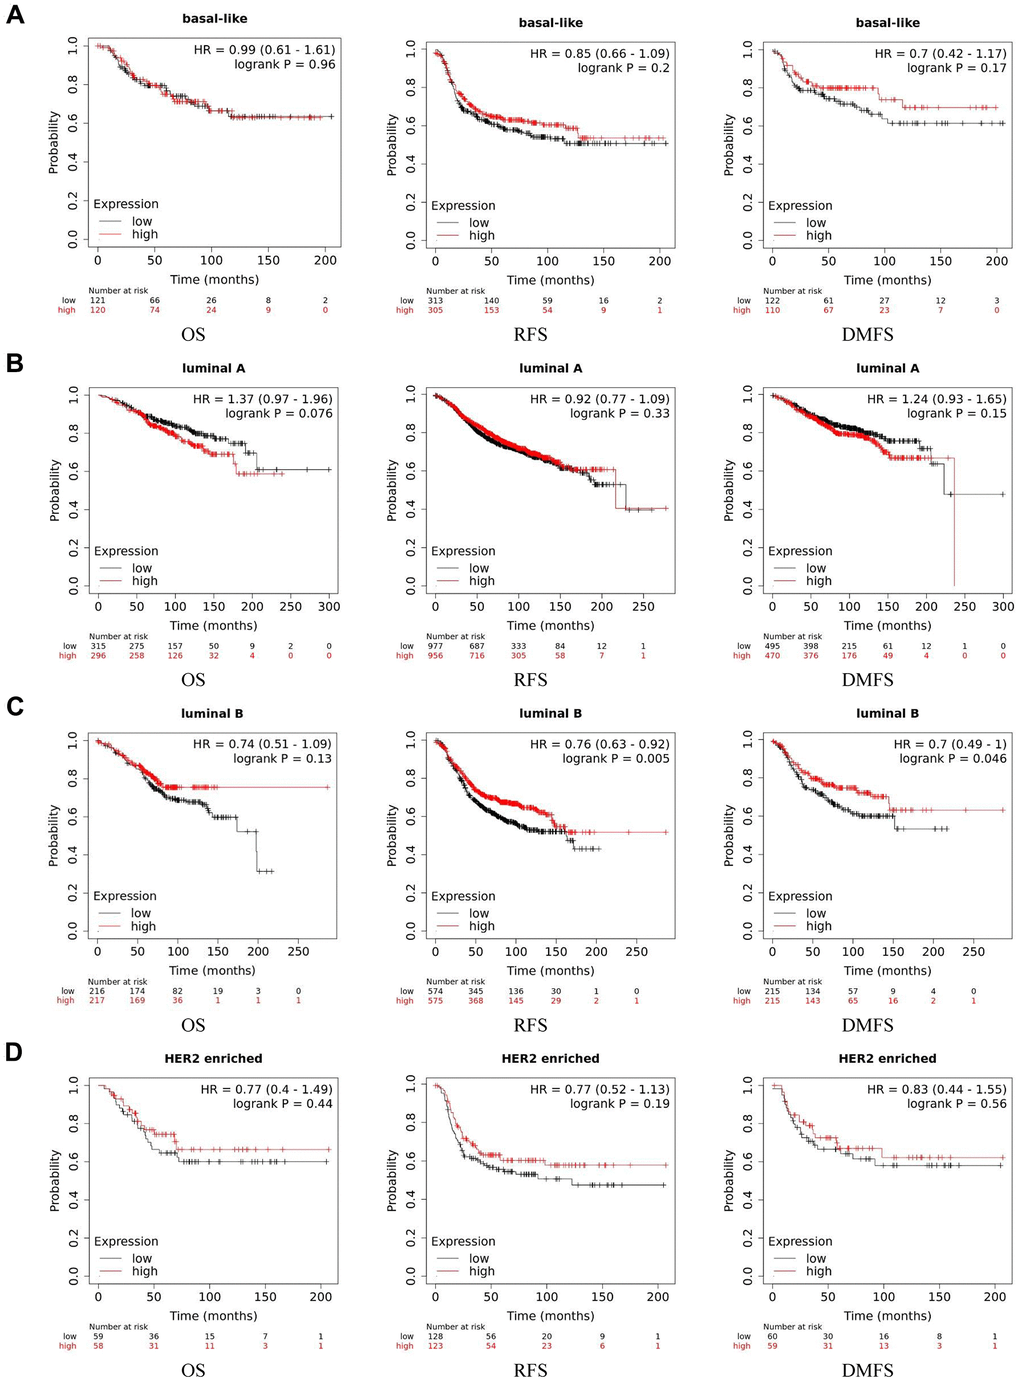 Kaplan-Meier survival curves of ACE2 expression level in different subtypes of breast cancer. (A) Basal-like, (B) luminal A, (C) luminal B and (D) HER2 enriched. OS, overall survival; RFS, recurrence-free survival; DMFS, distant metastasis-free survival.